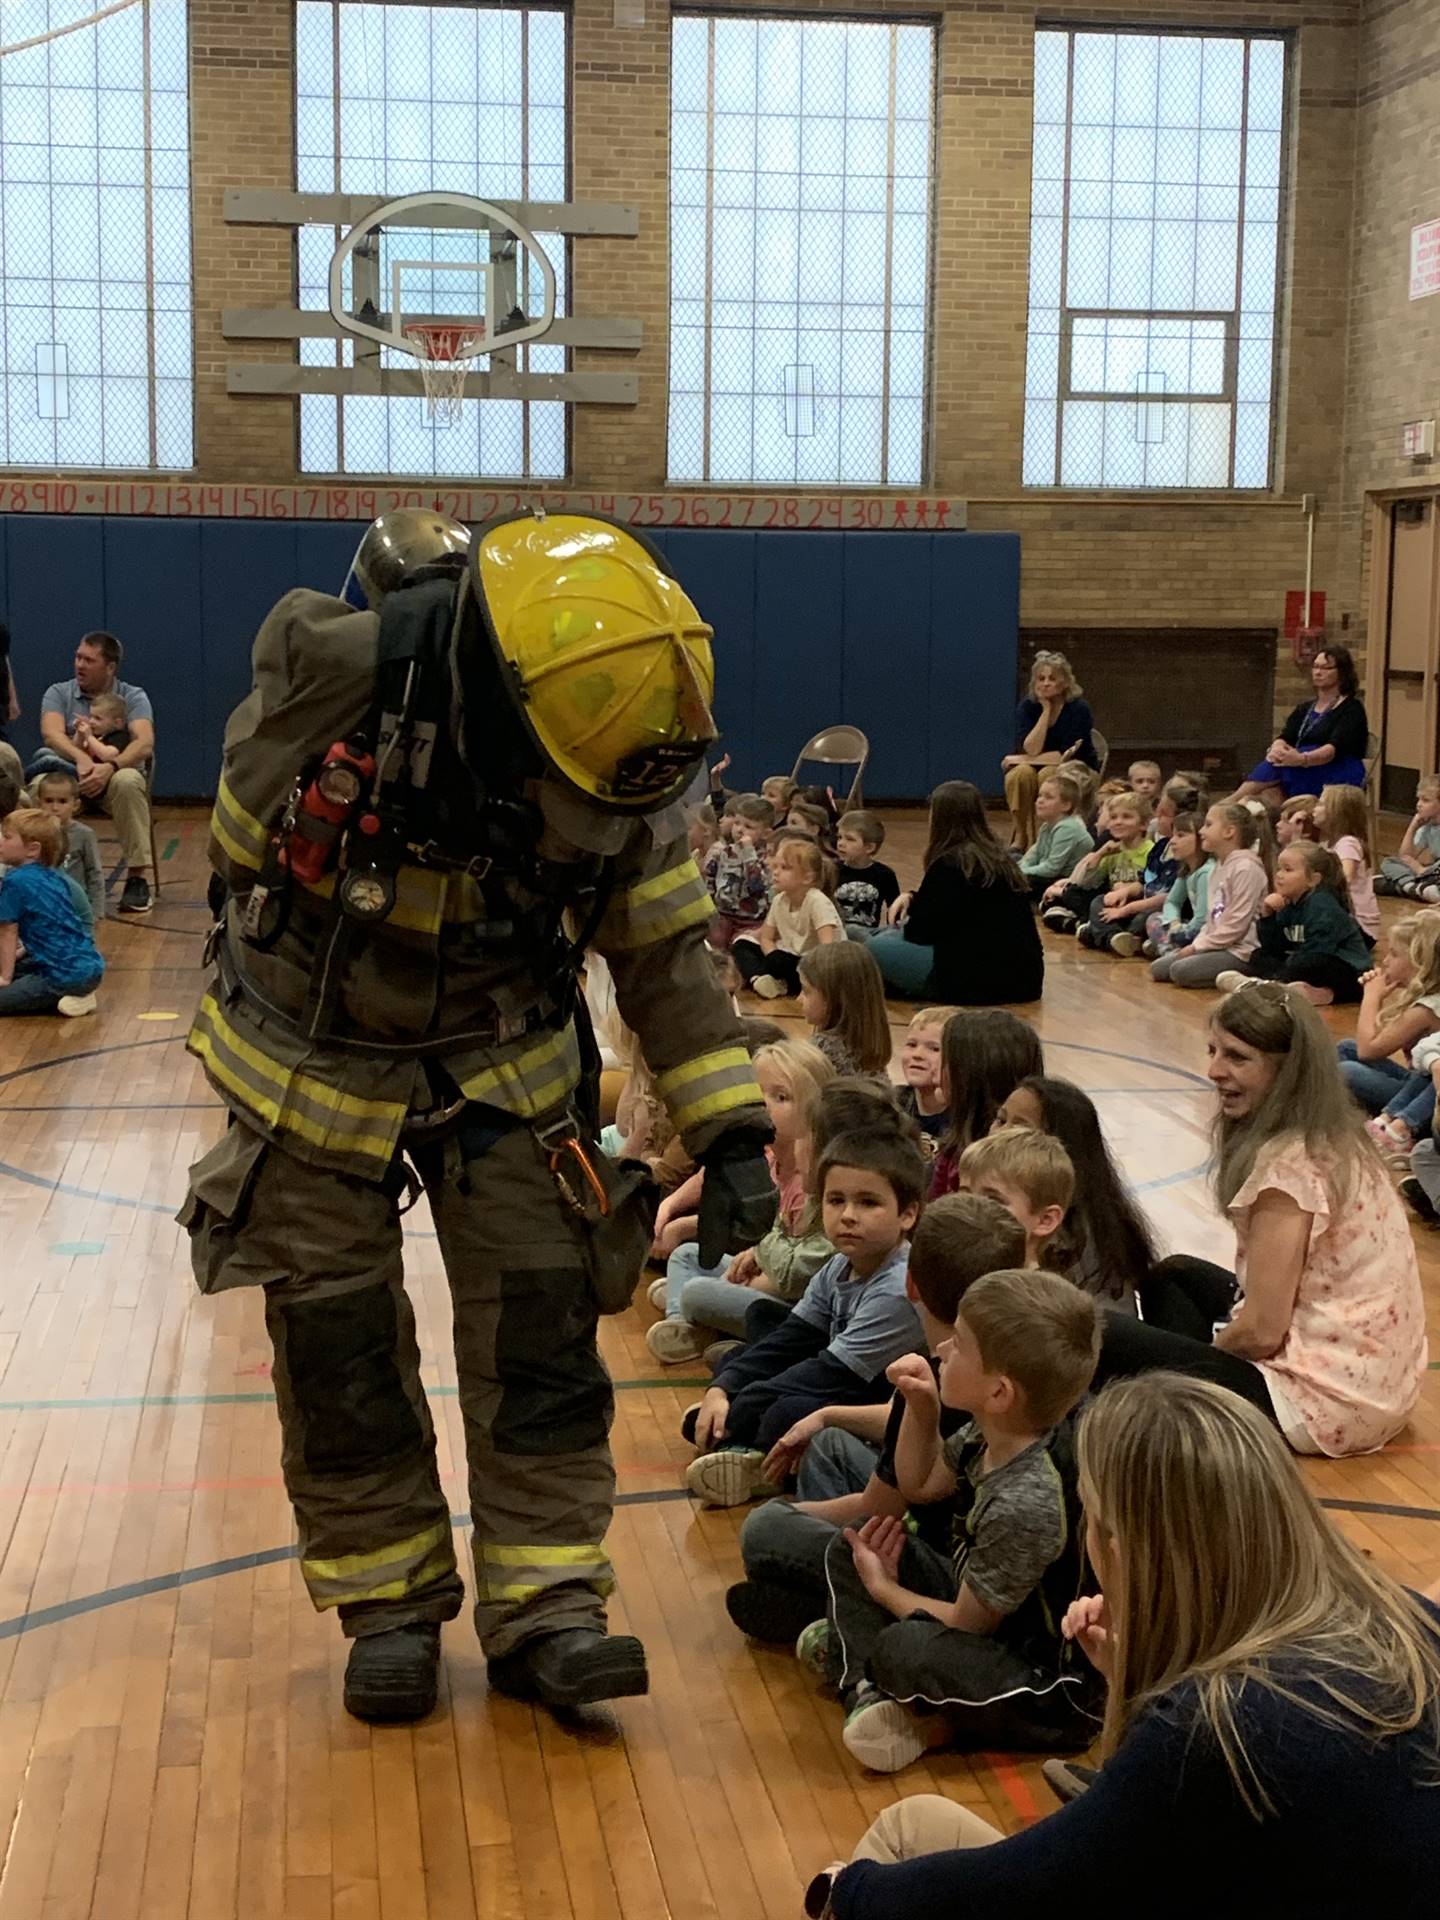 firefighters dressed in full gear and hats giving knuckle pounds to students